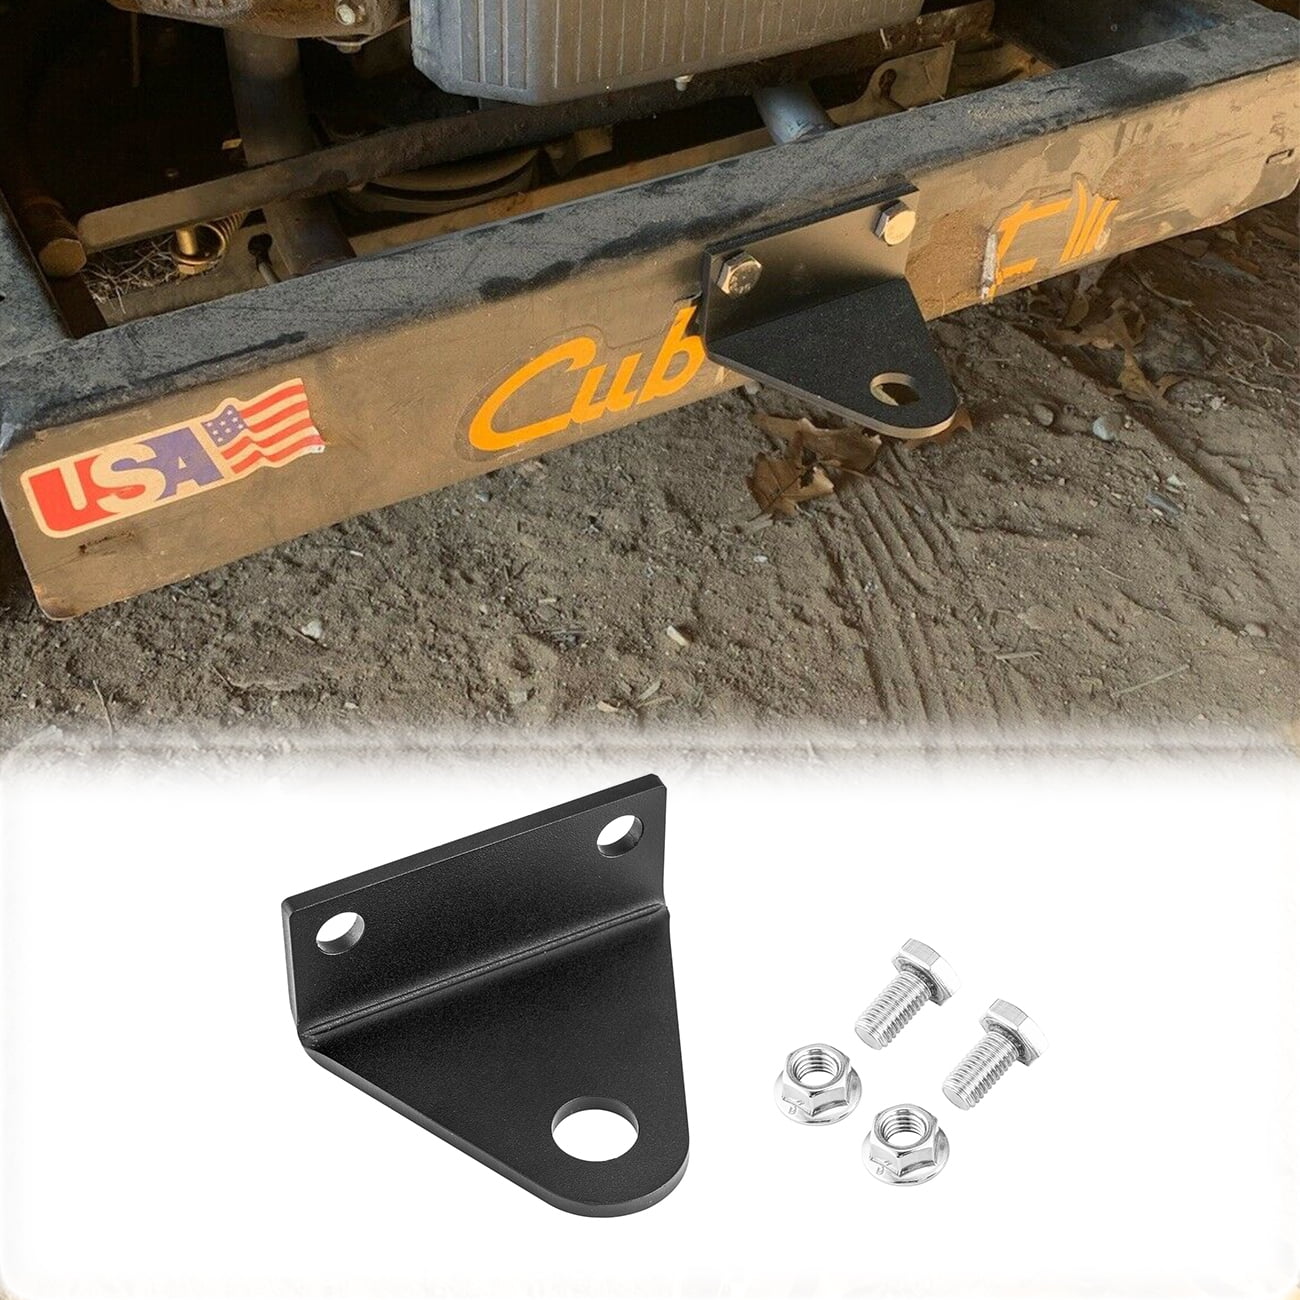 Universal Zero Turn Mower Trailer Tow Hitch for Cub Cadet RZT54/50/42 New 